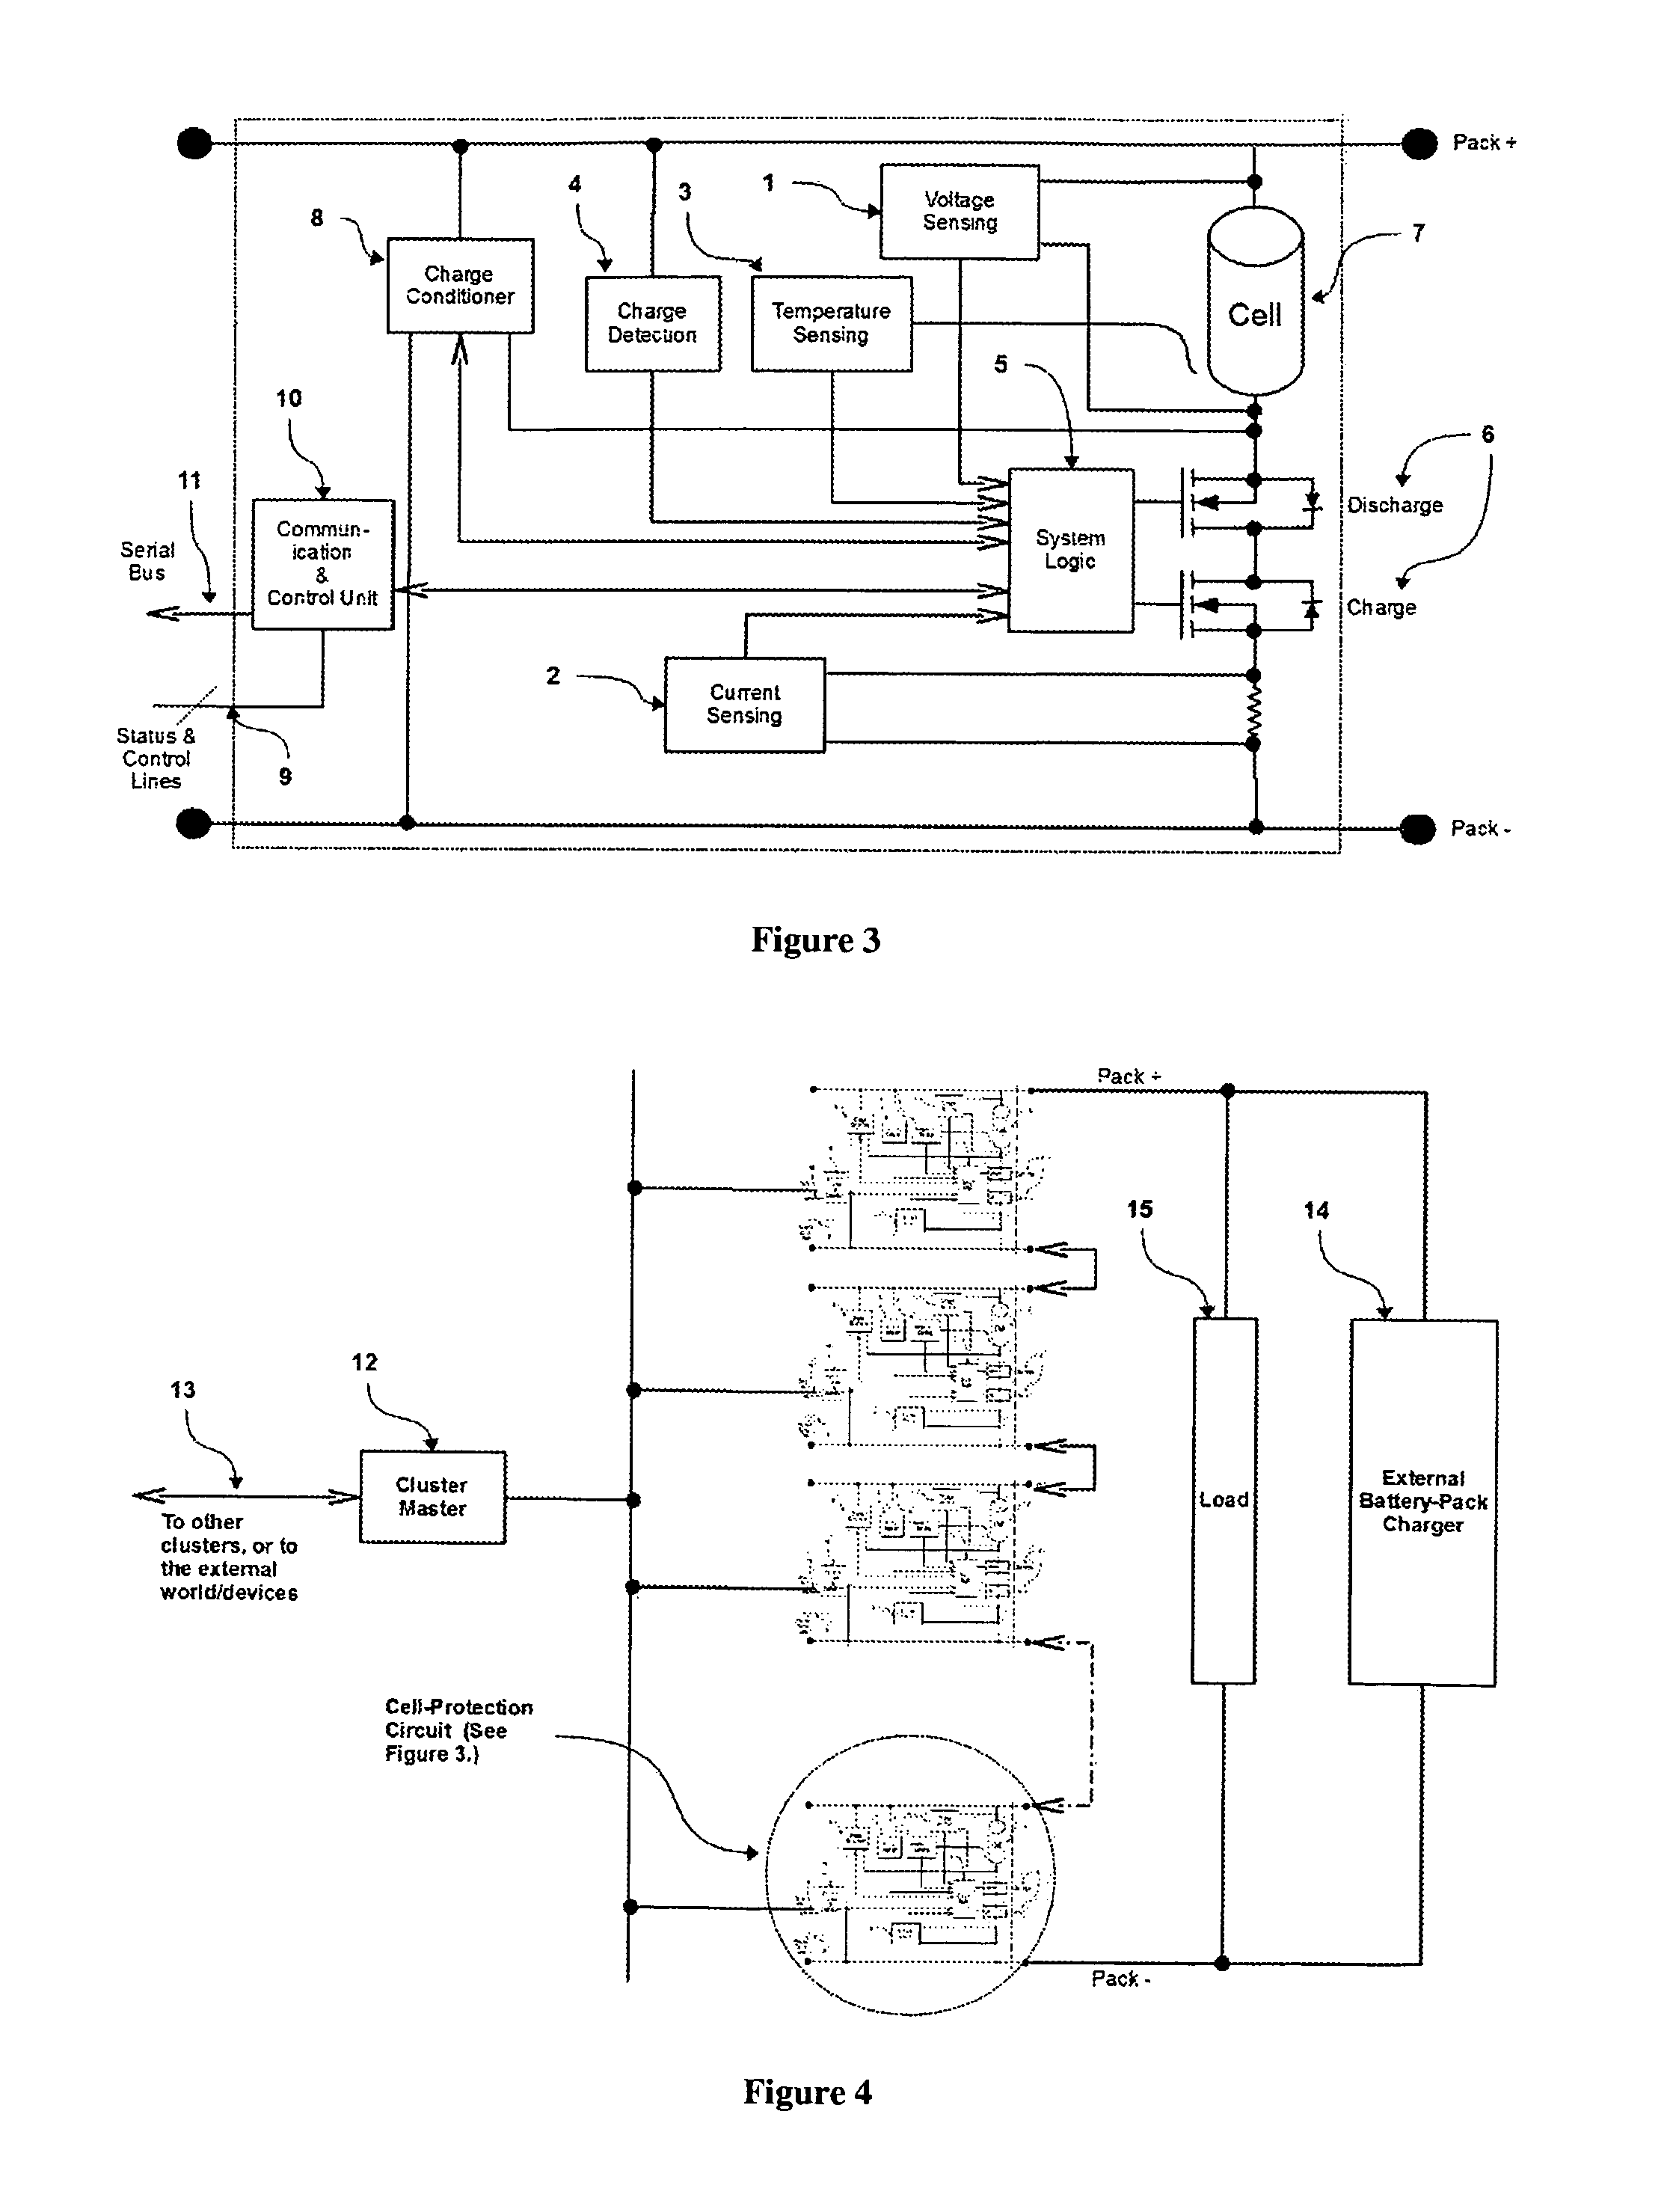 Battery cell protection and conditioning circuit and system